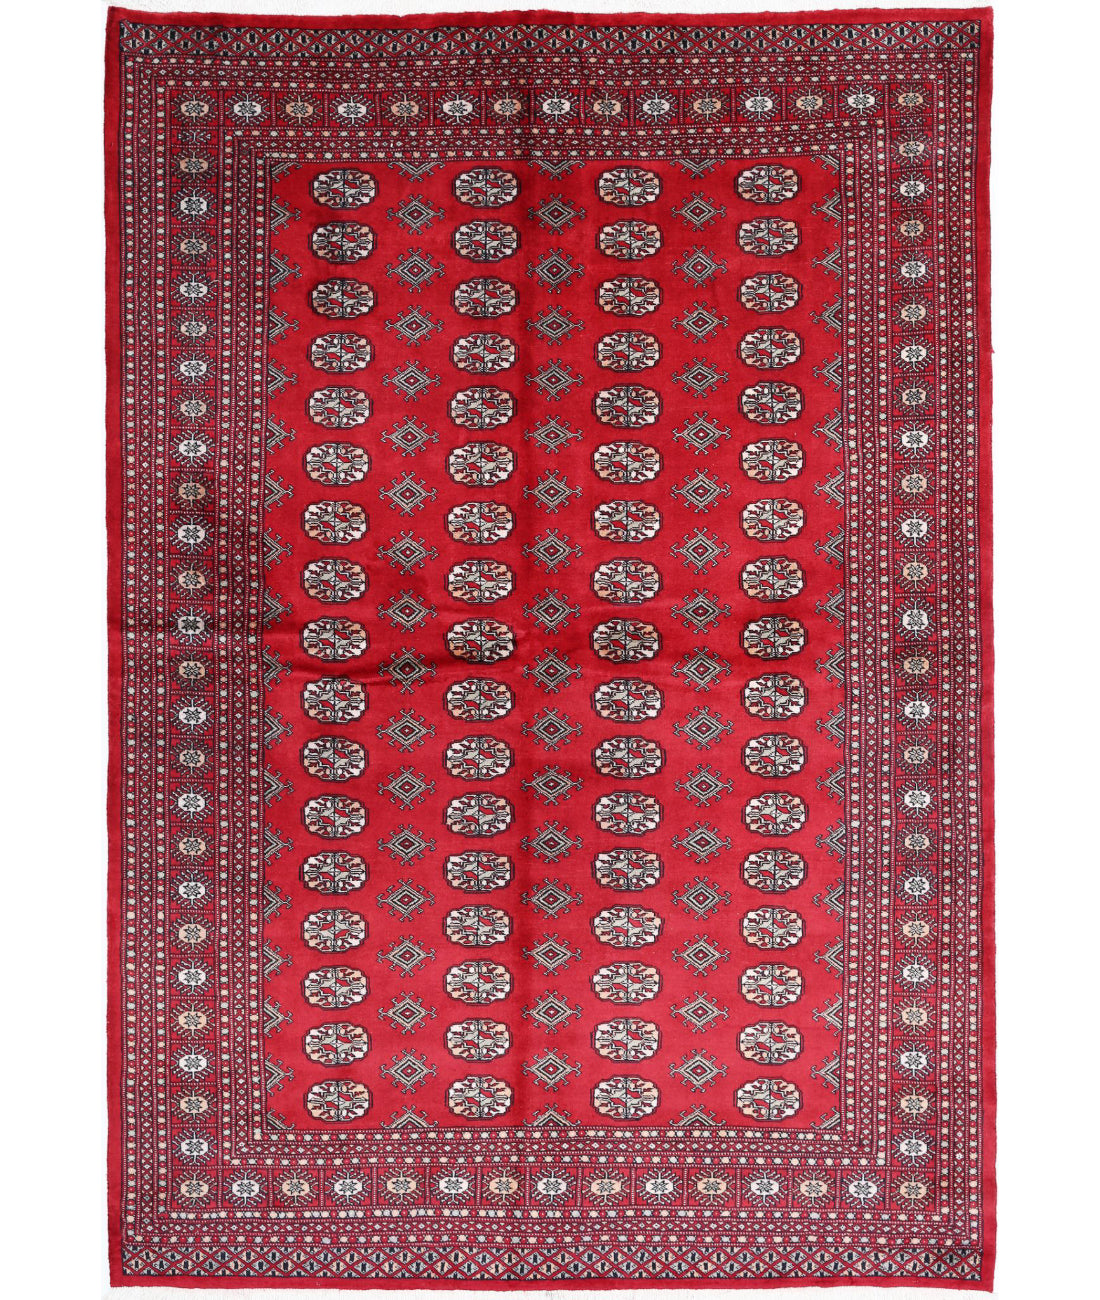 Hand Knotted Tribal Bokhara Wool Rug - 6'1'' x 8'9'' 6'1'' x 8'9'' (183 X 263) / Red / Black